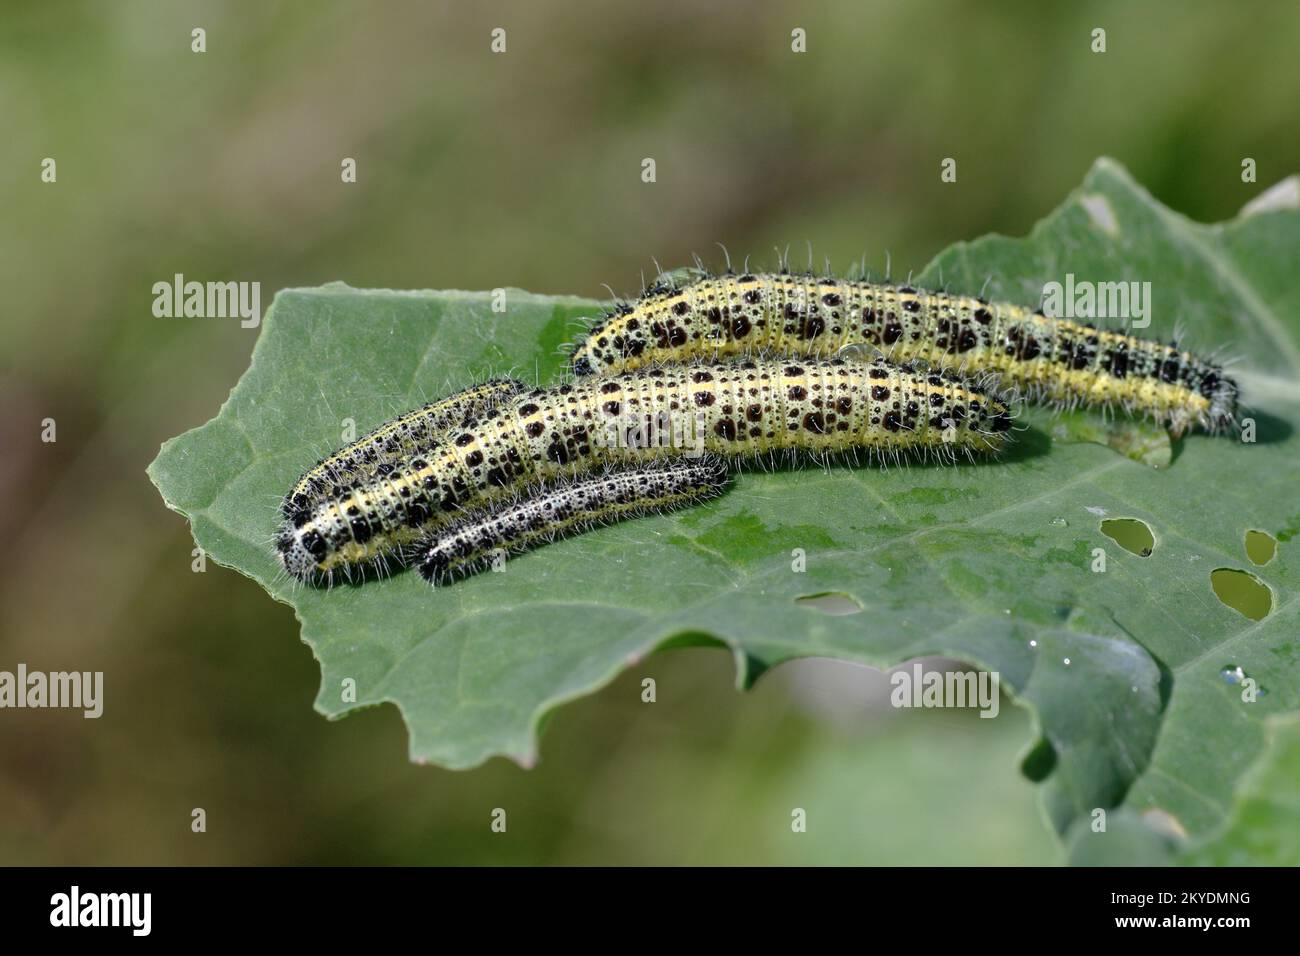 Close-up, caterpillars, Large cabbage white (Pieris brassicae) butterfly, butterfly, caterpillars of the Large cabbage white butterfly on a leaf Stock Photo